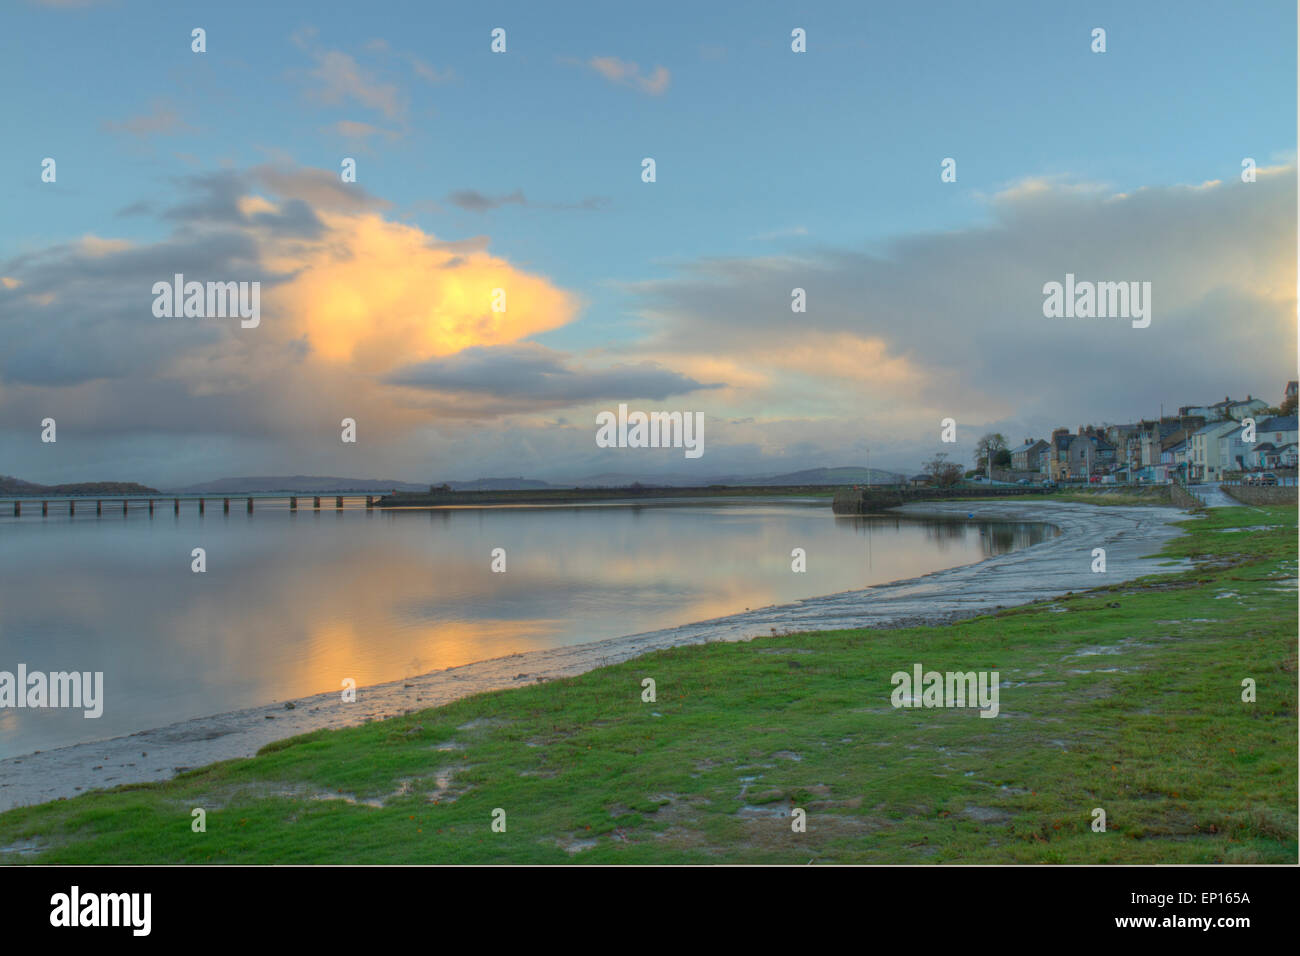 View of Arnside seafront and the Kent estuary and viaduct in early morning. Cumbria, England. November. Stock Photo